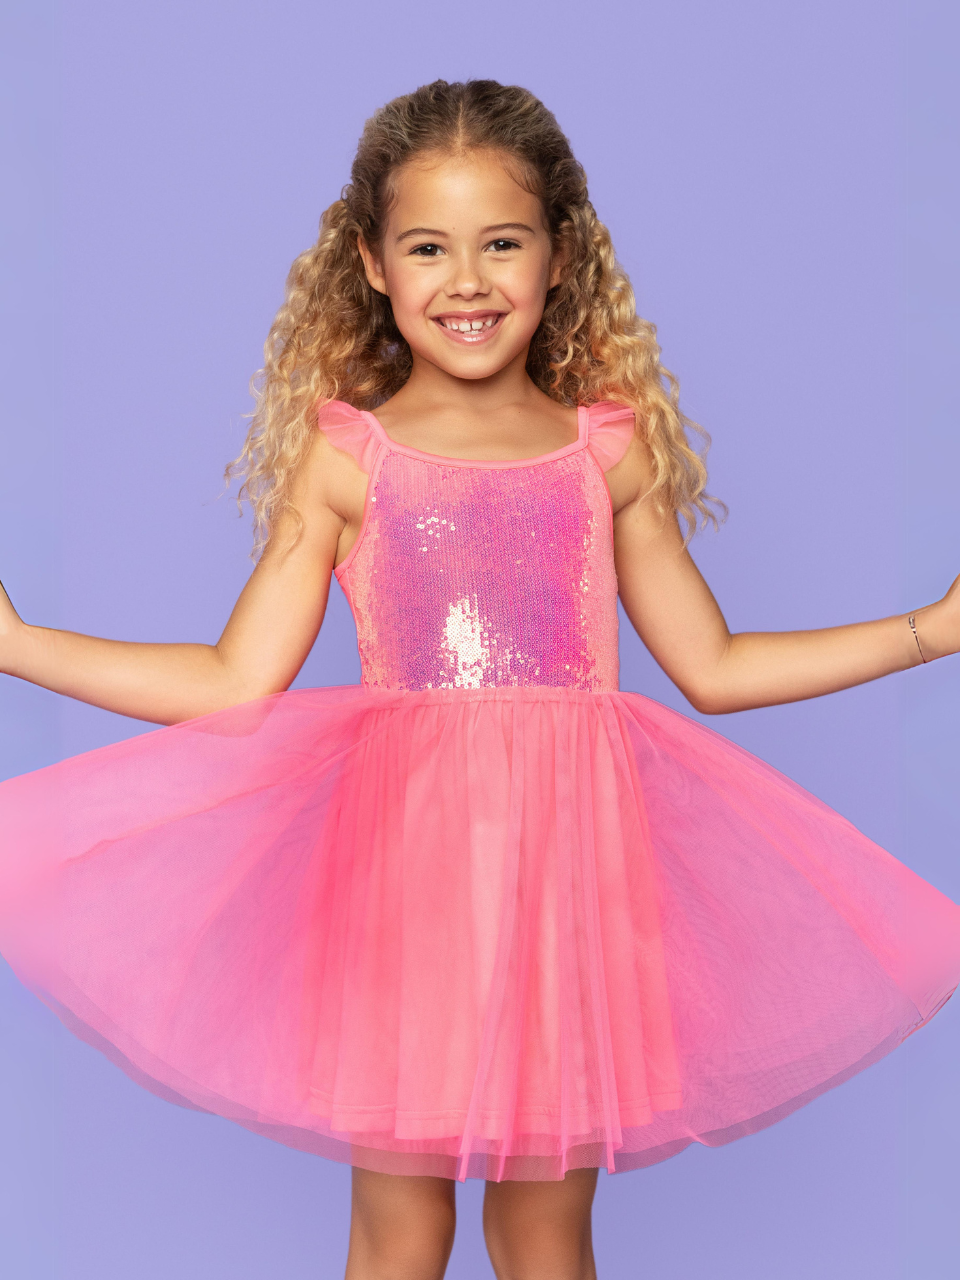 A young girl wearing a pink sequin dress.